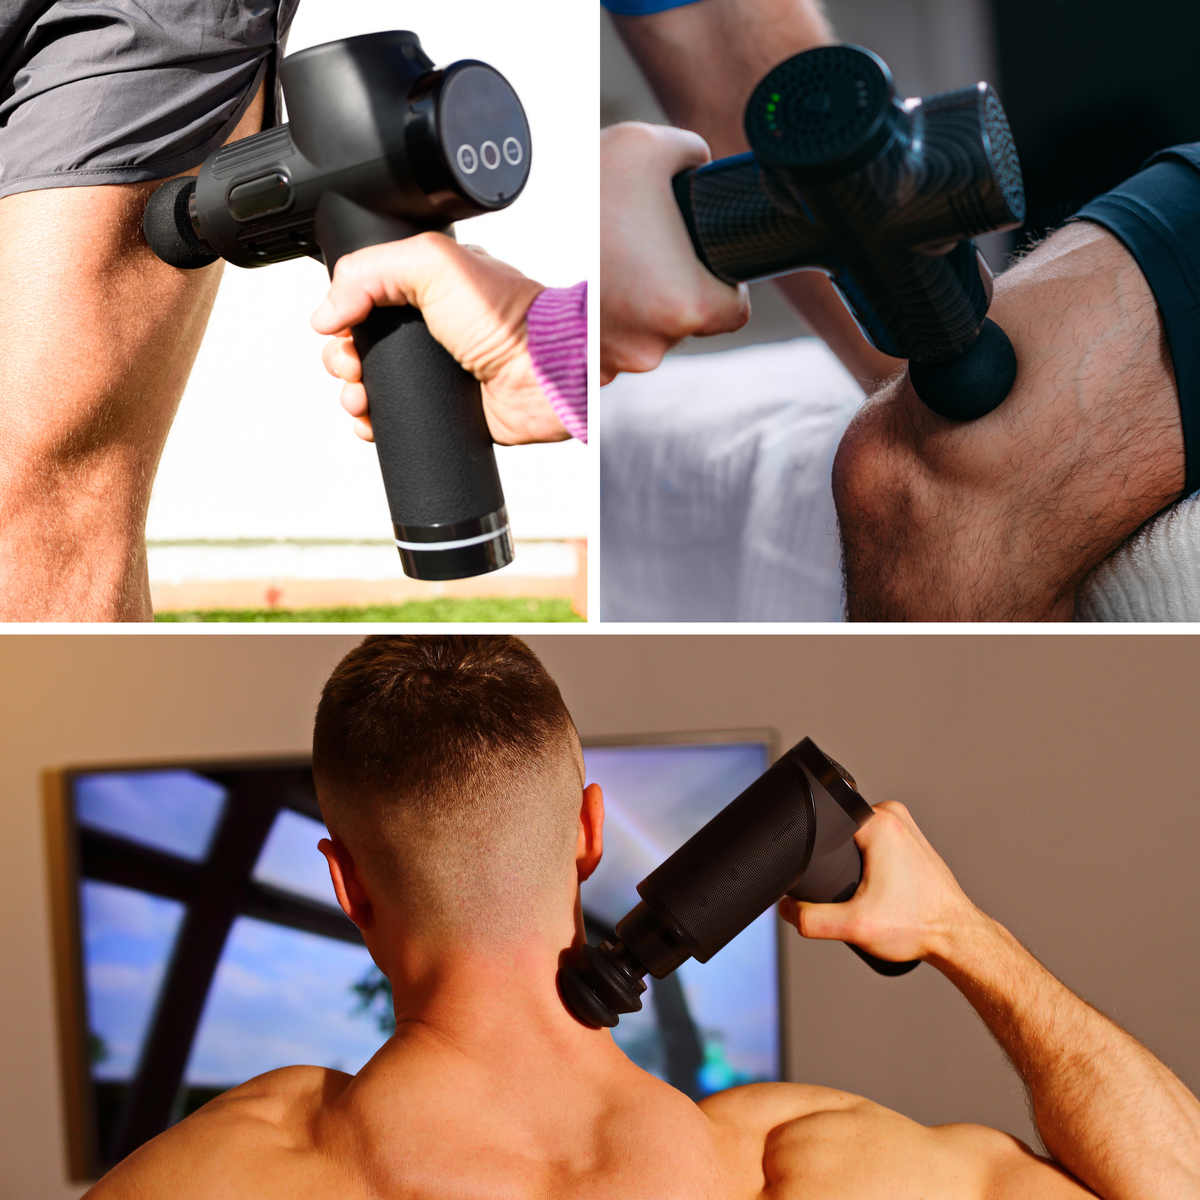 Using massage gun on thigh muscles, and neck muscles